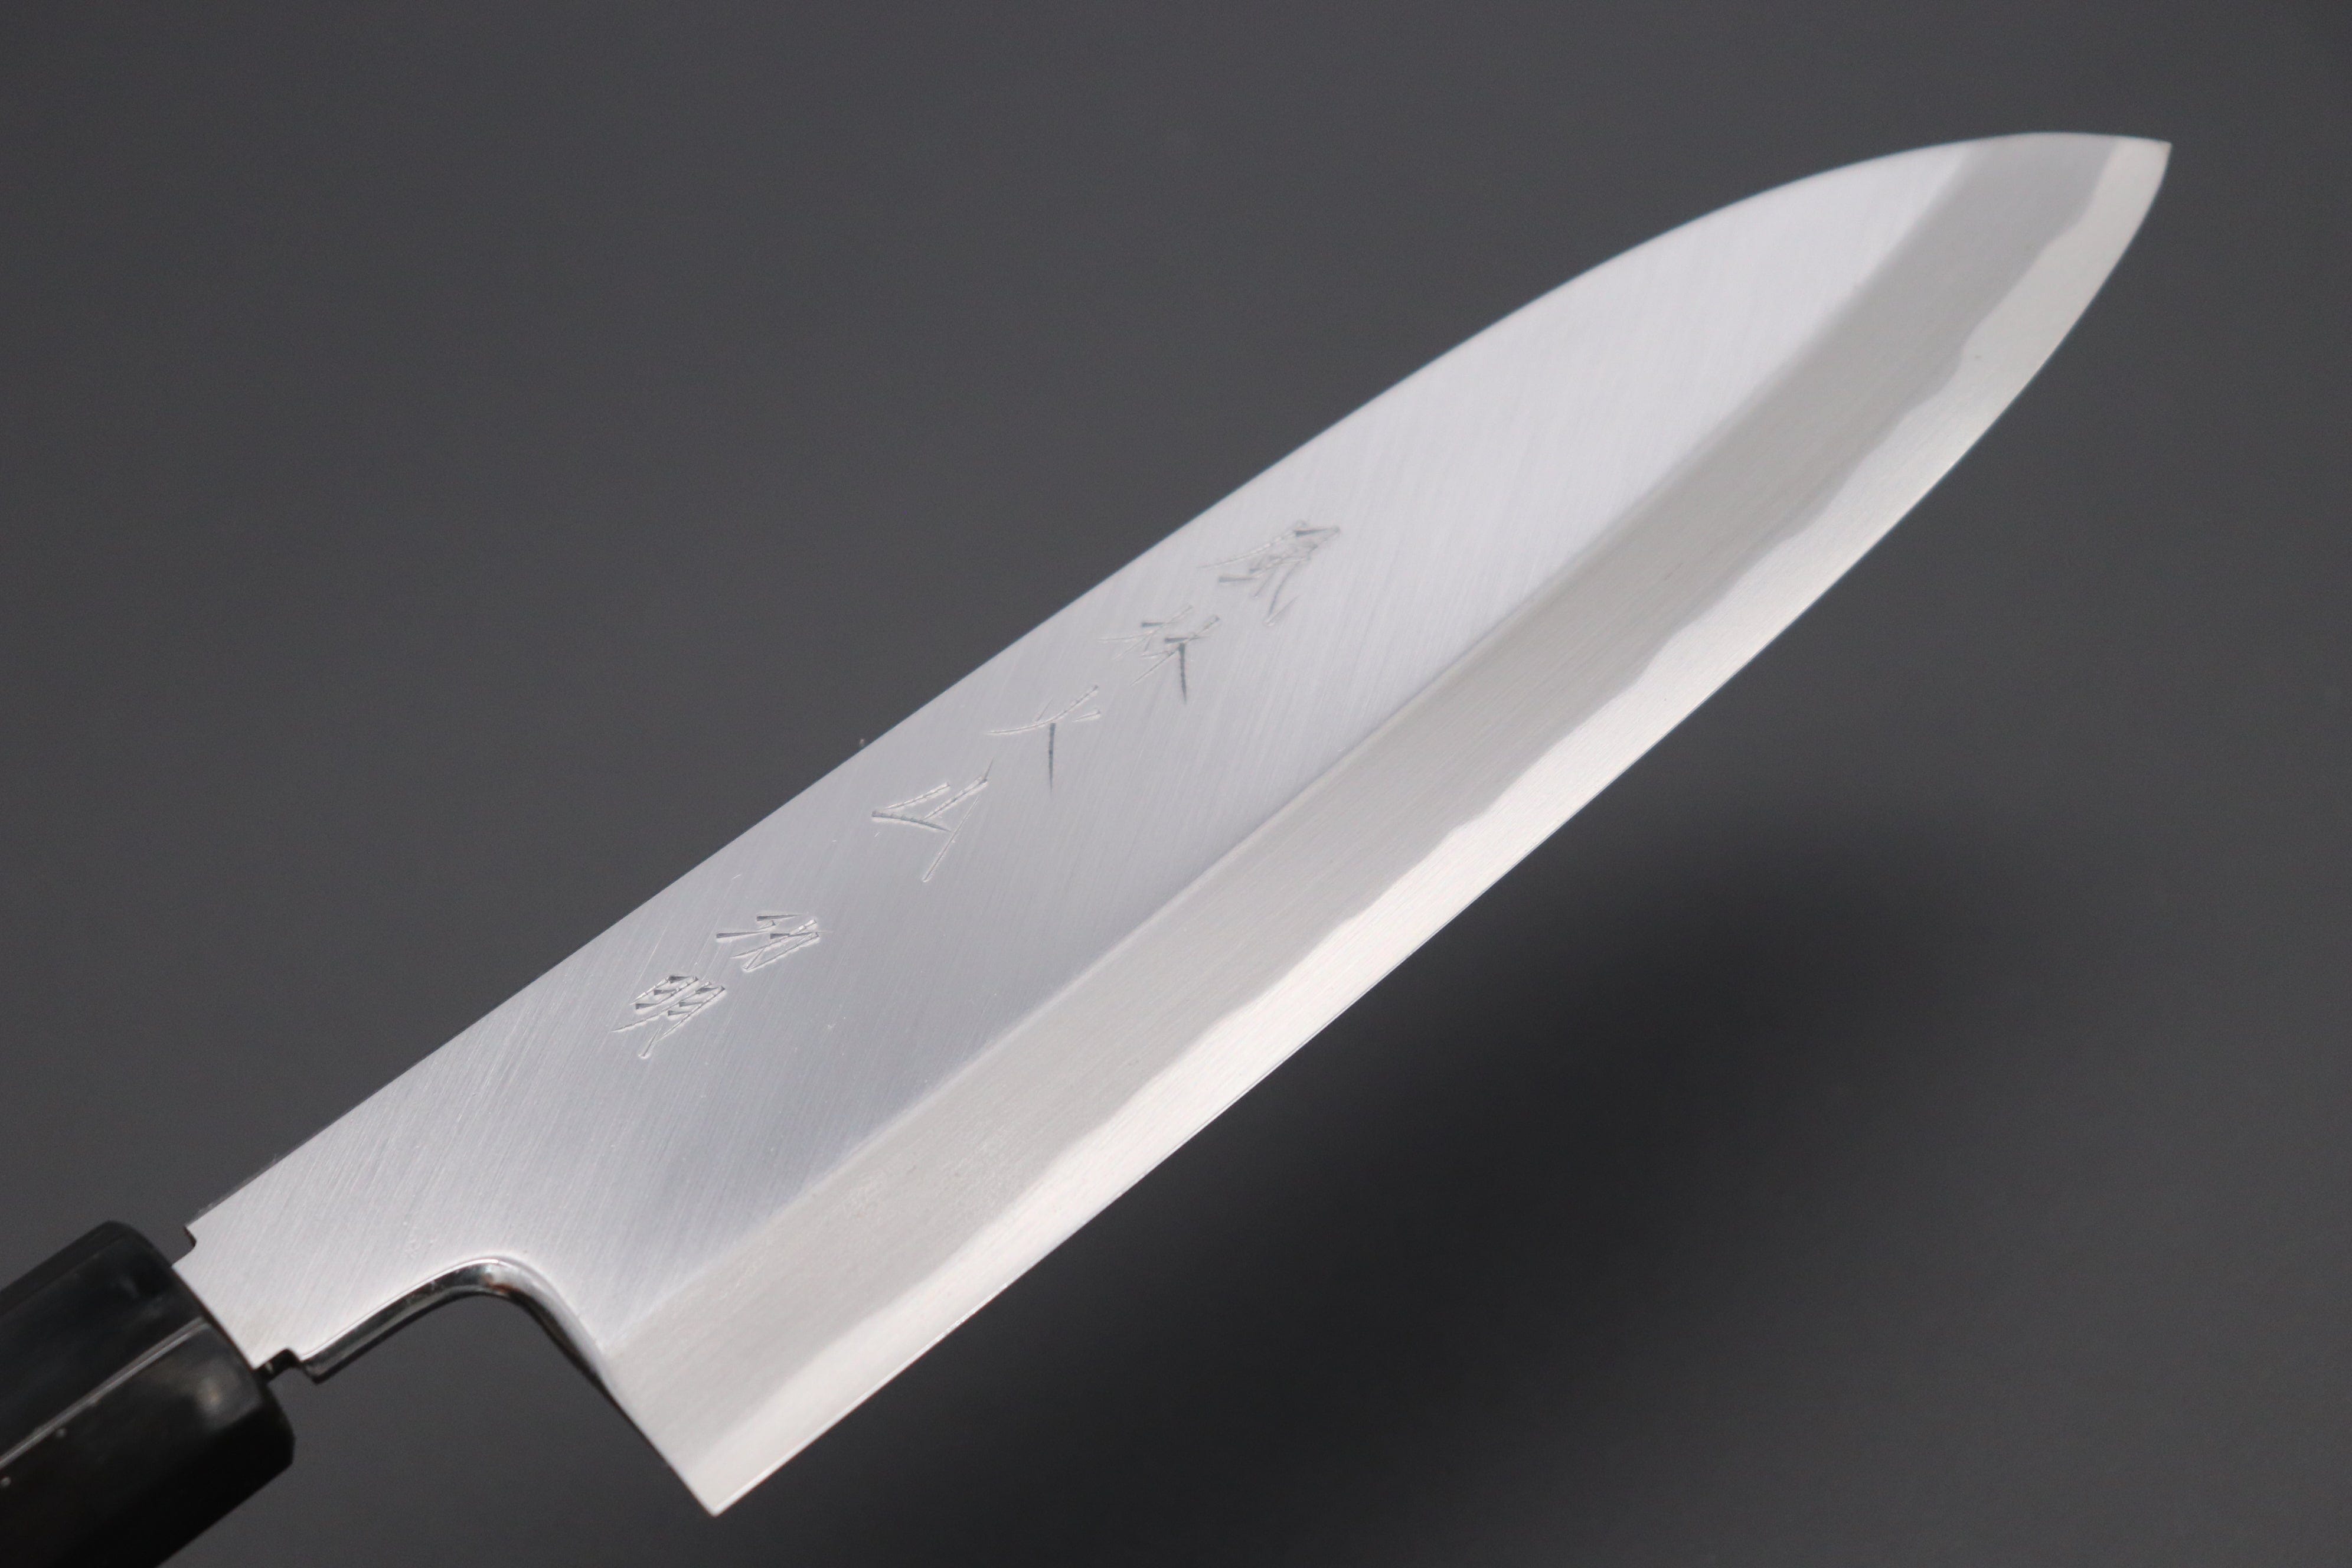 Chinese Cleaver Butcher Chef Knife (Model FG) MADE IN JAPAN - FREE US  SHIPPING